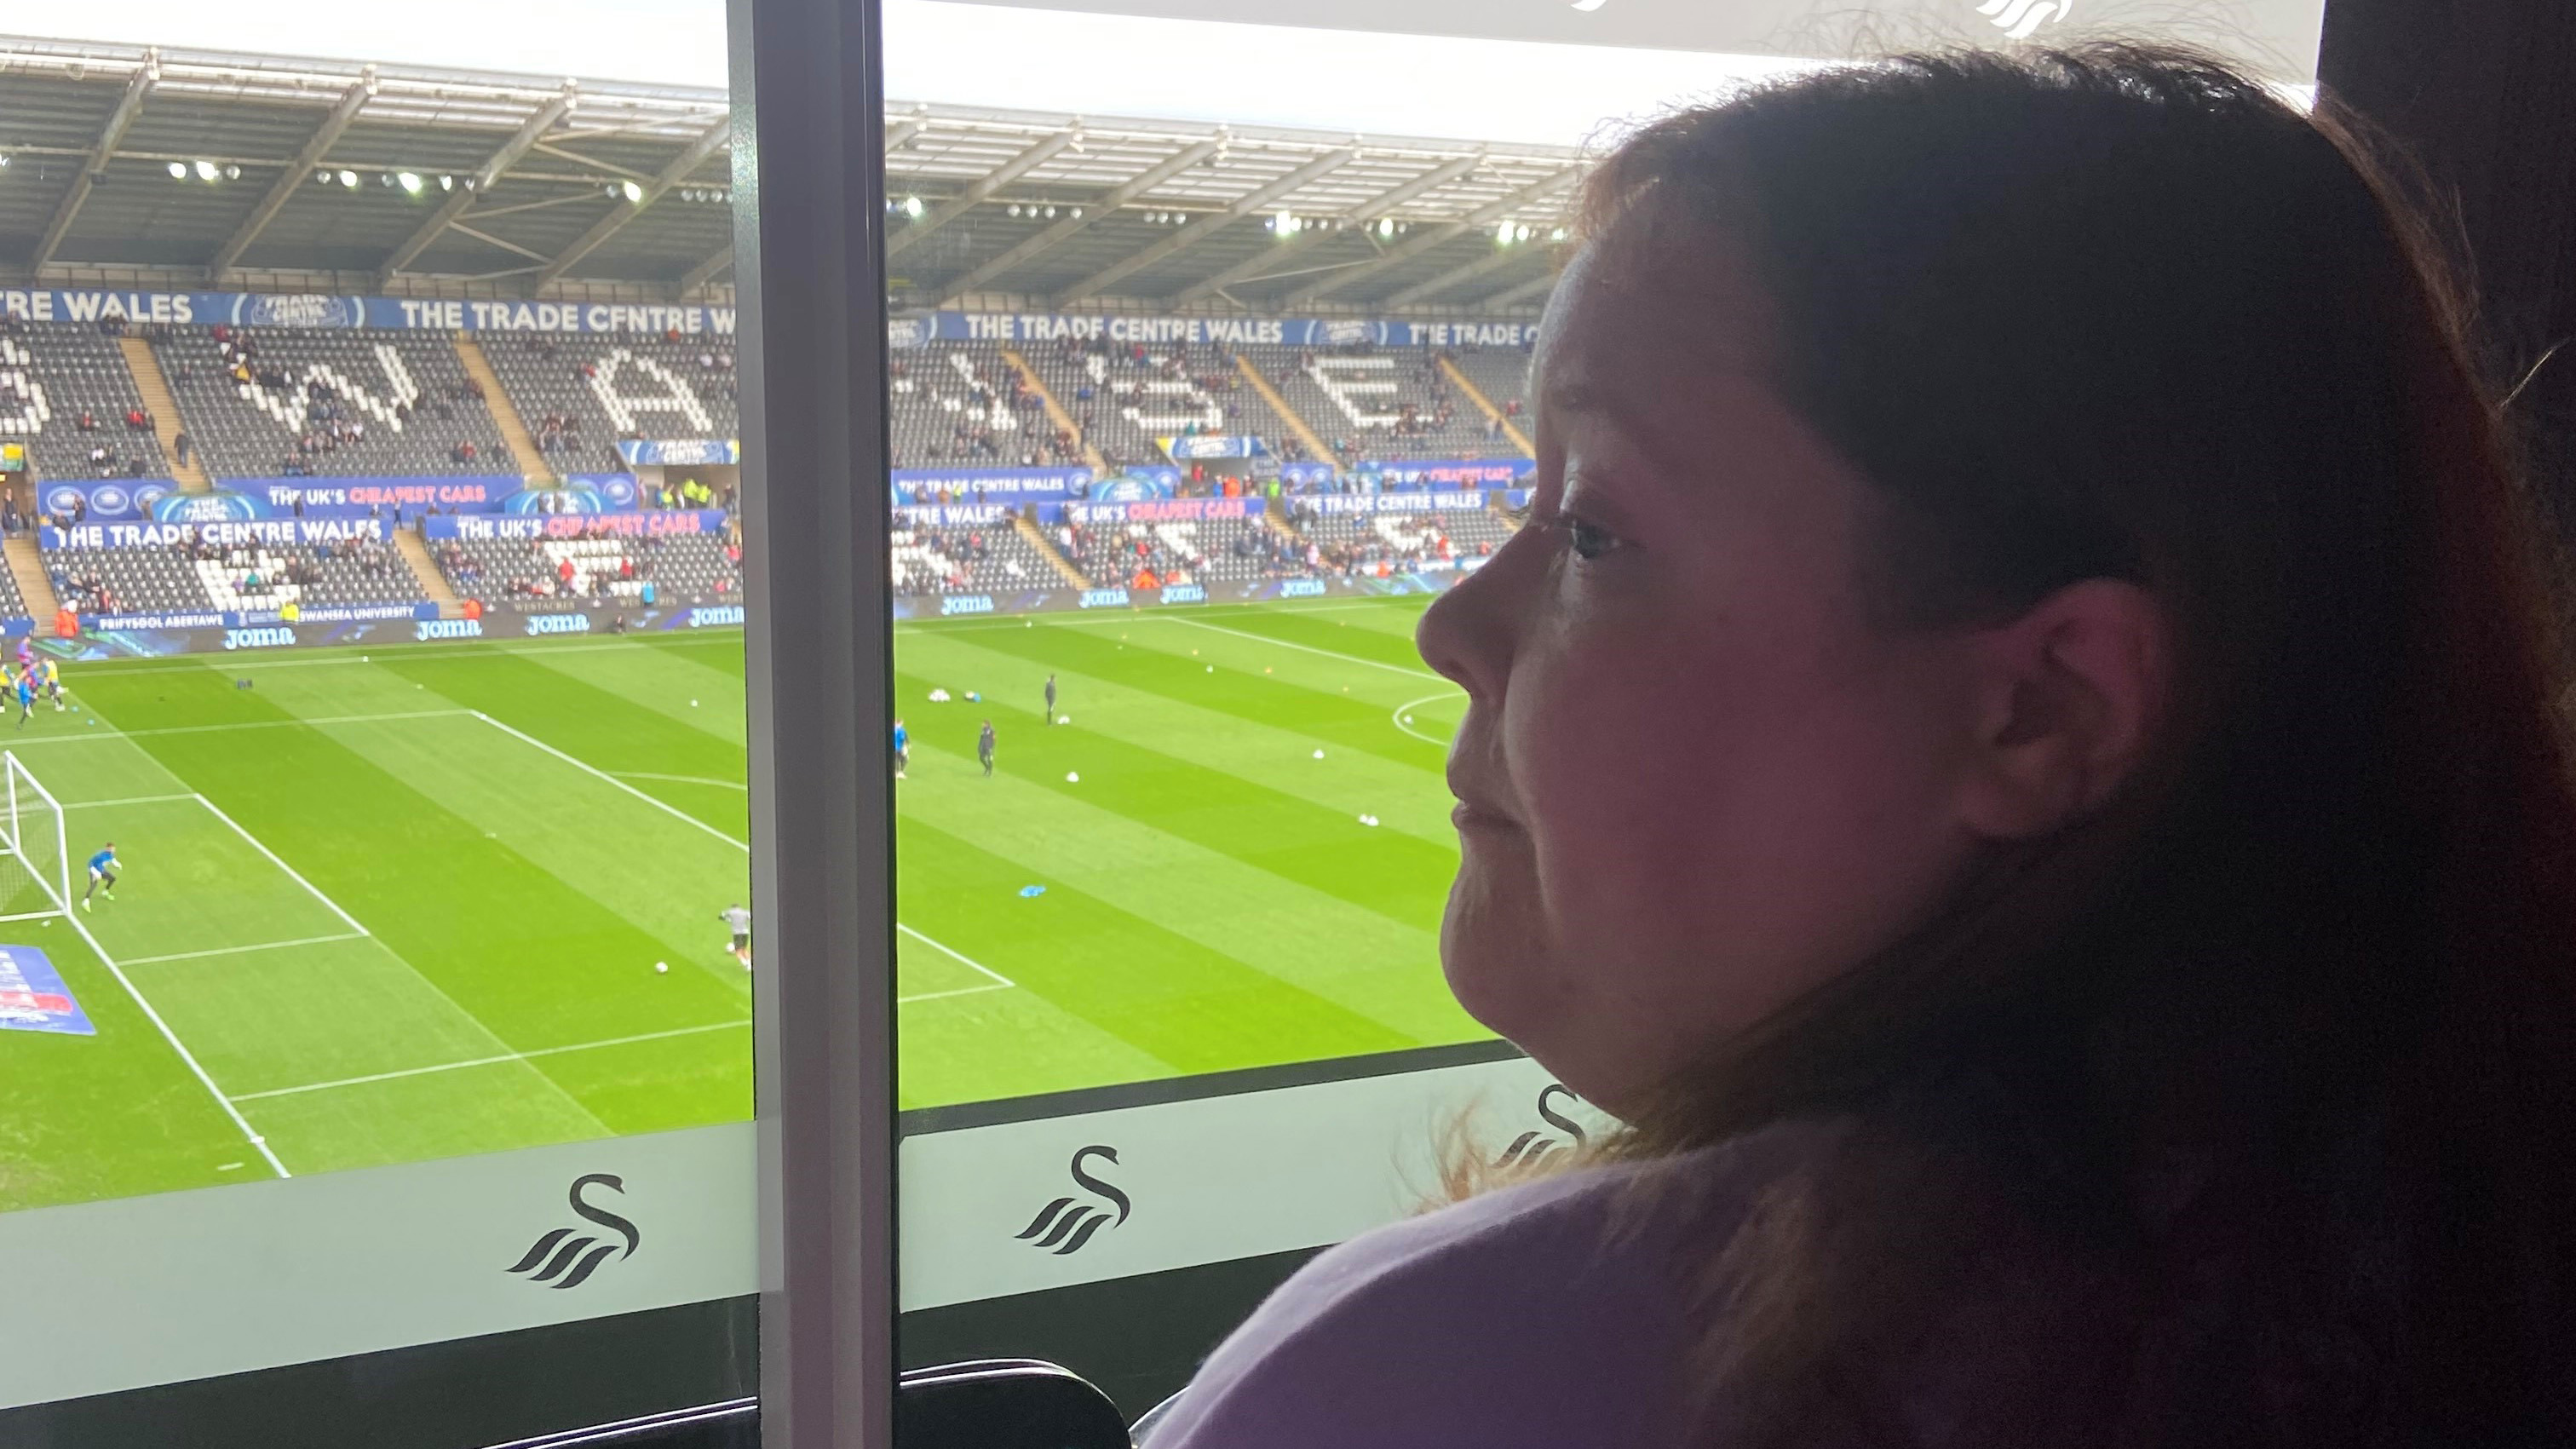 Nicola watches the Swansea City match through the glass in the sensory room